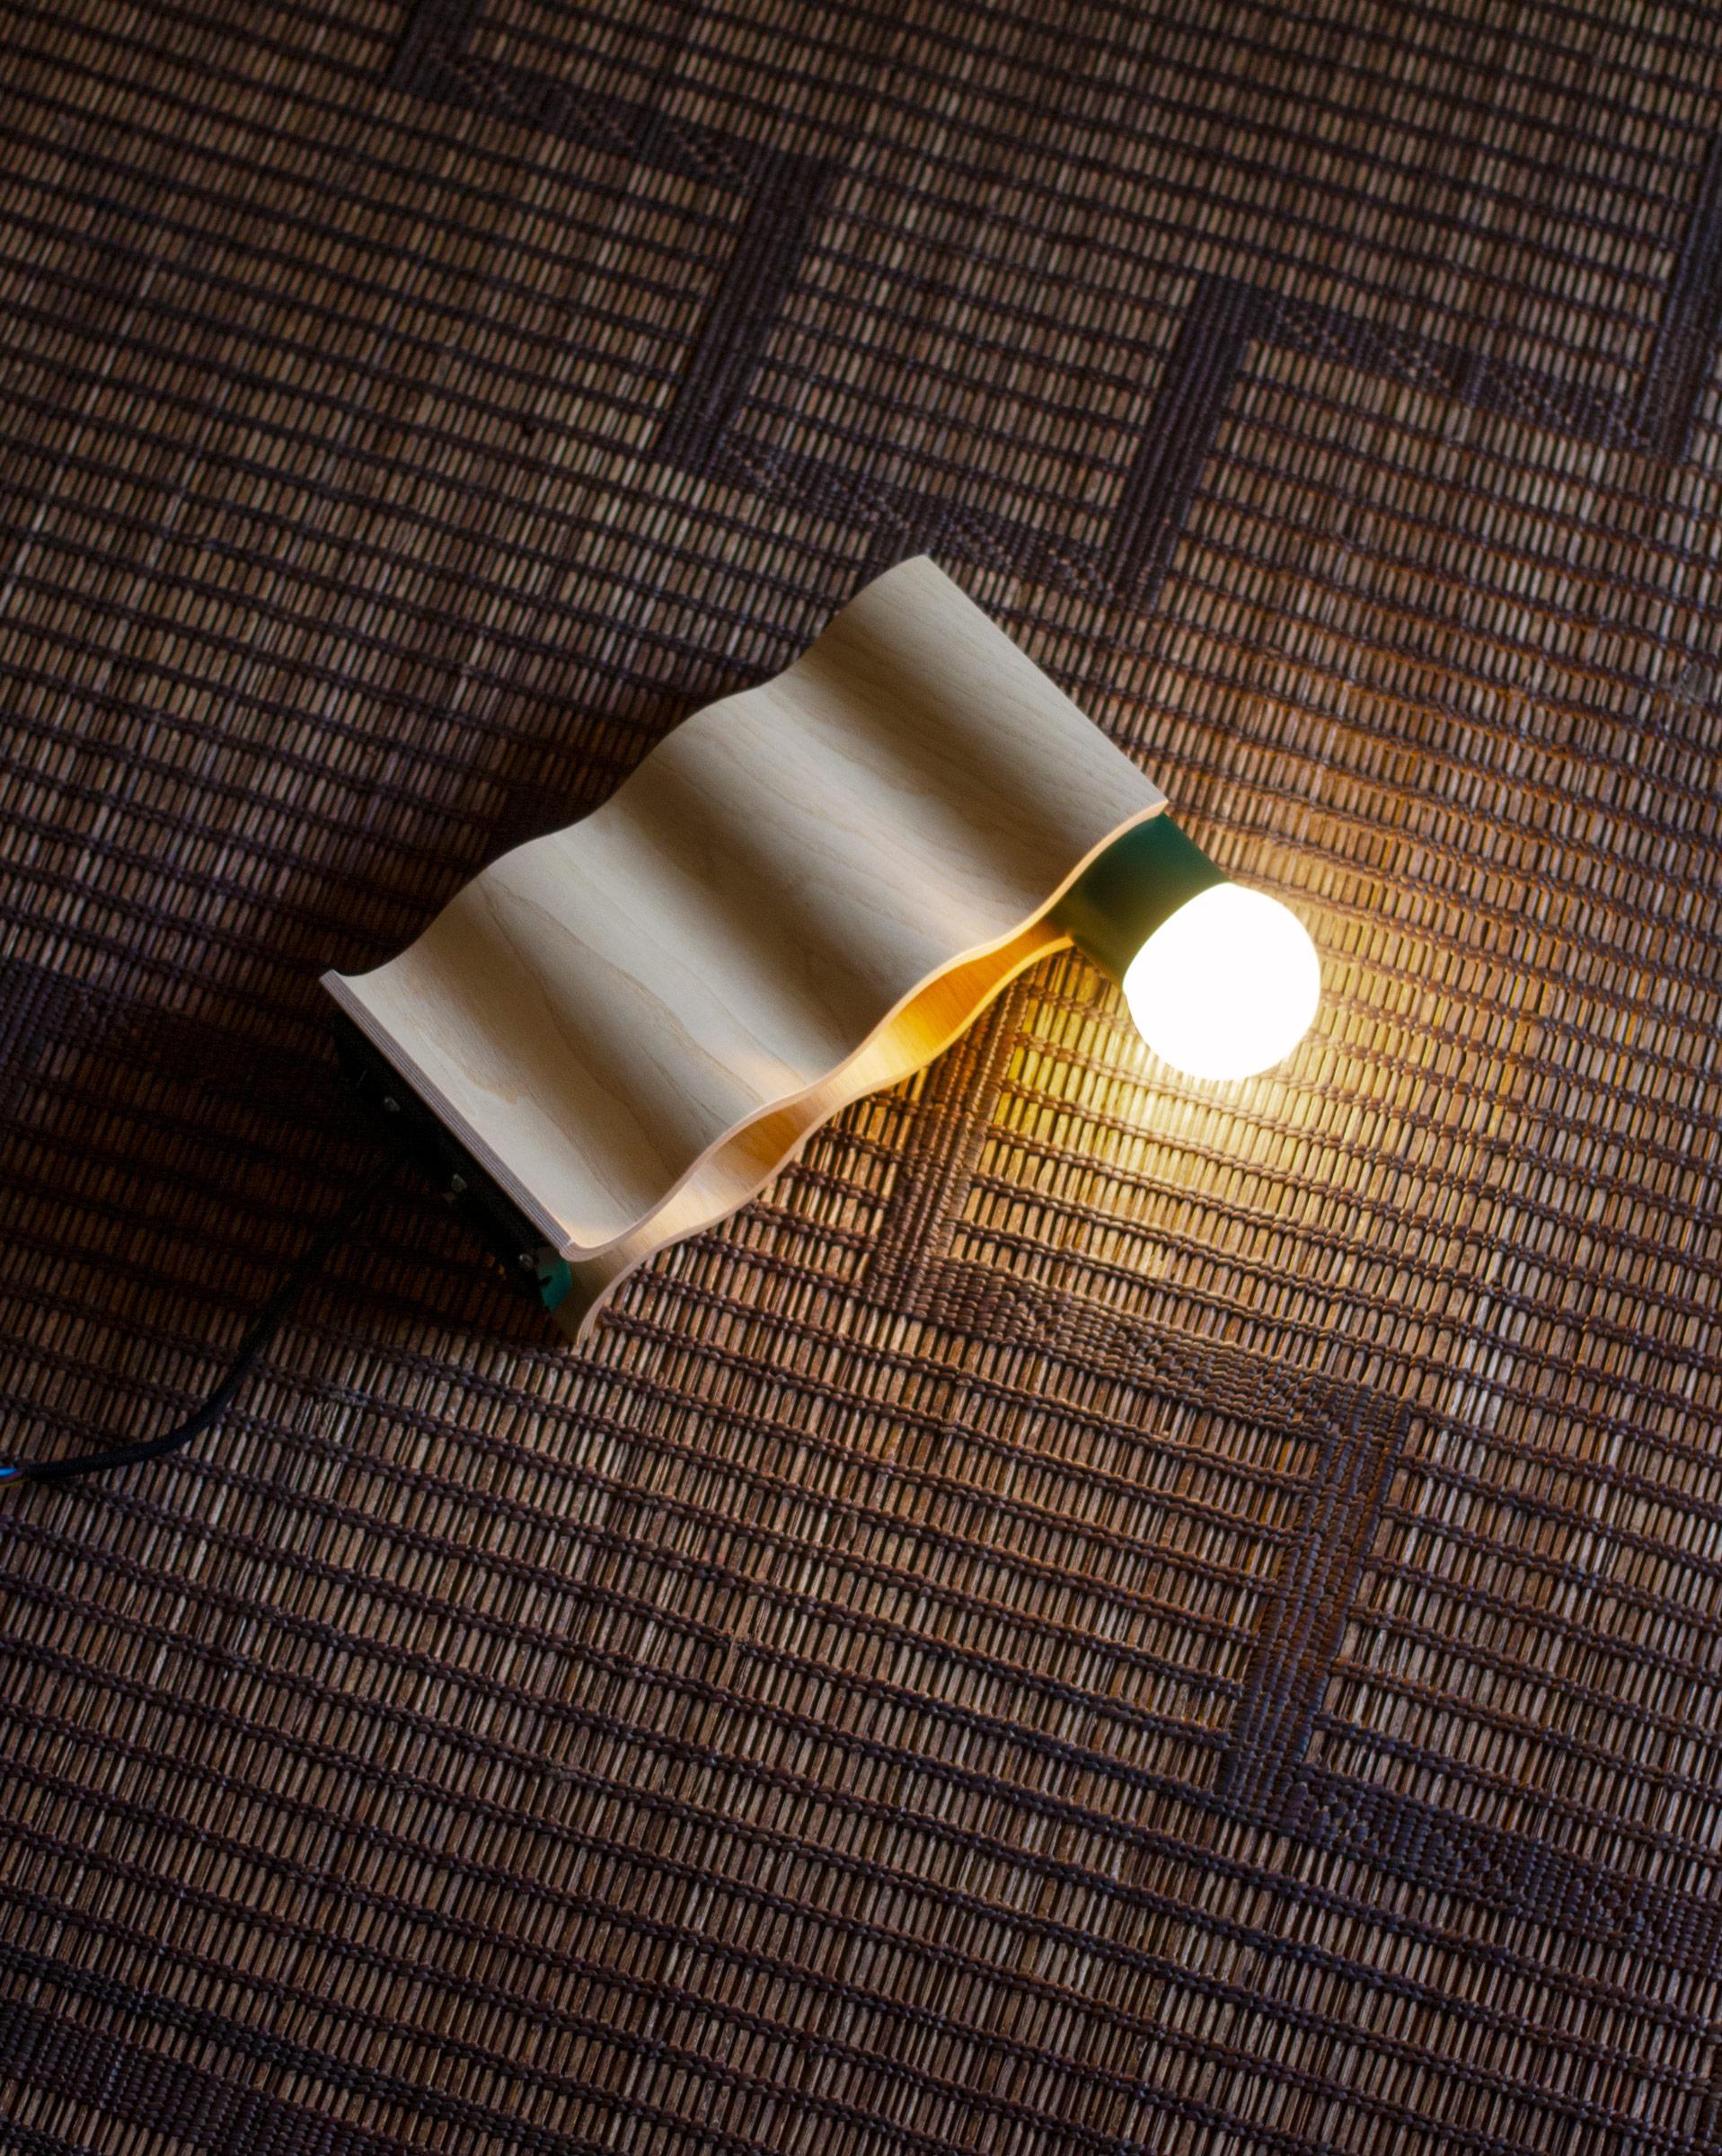 British Single Corrugation Sconce / Wall Light in Natural Ash Veneer and Moss Green For Sale